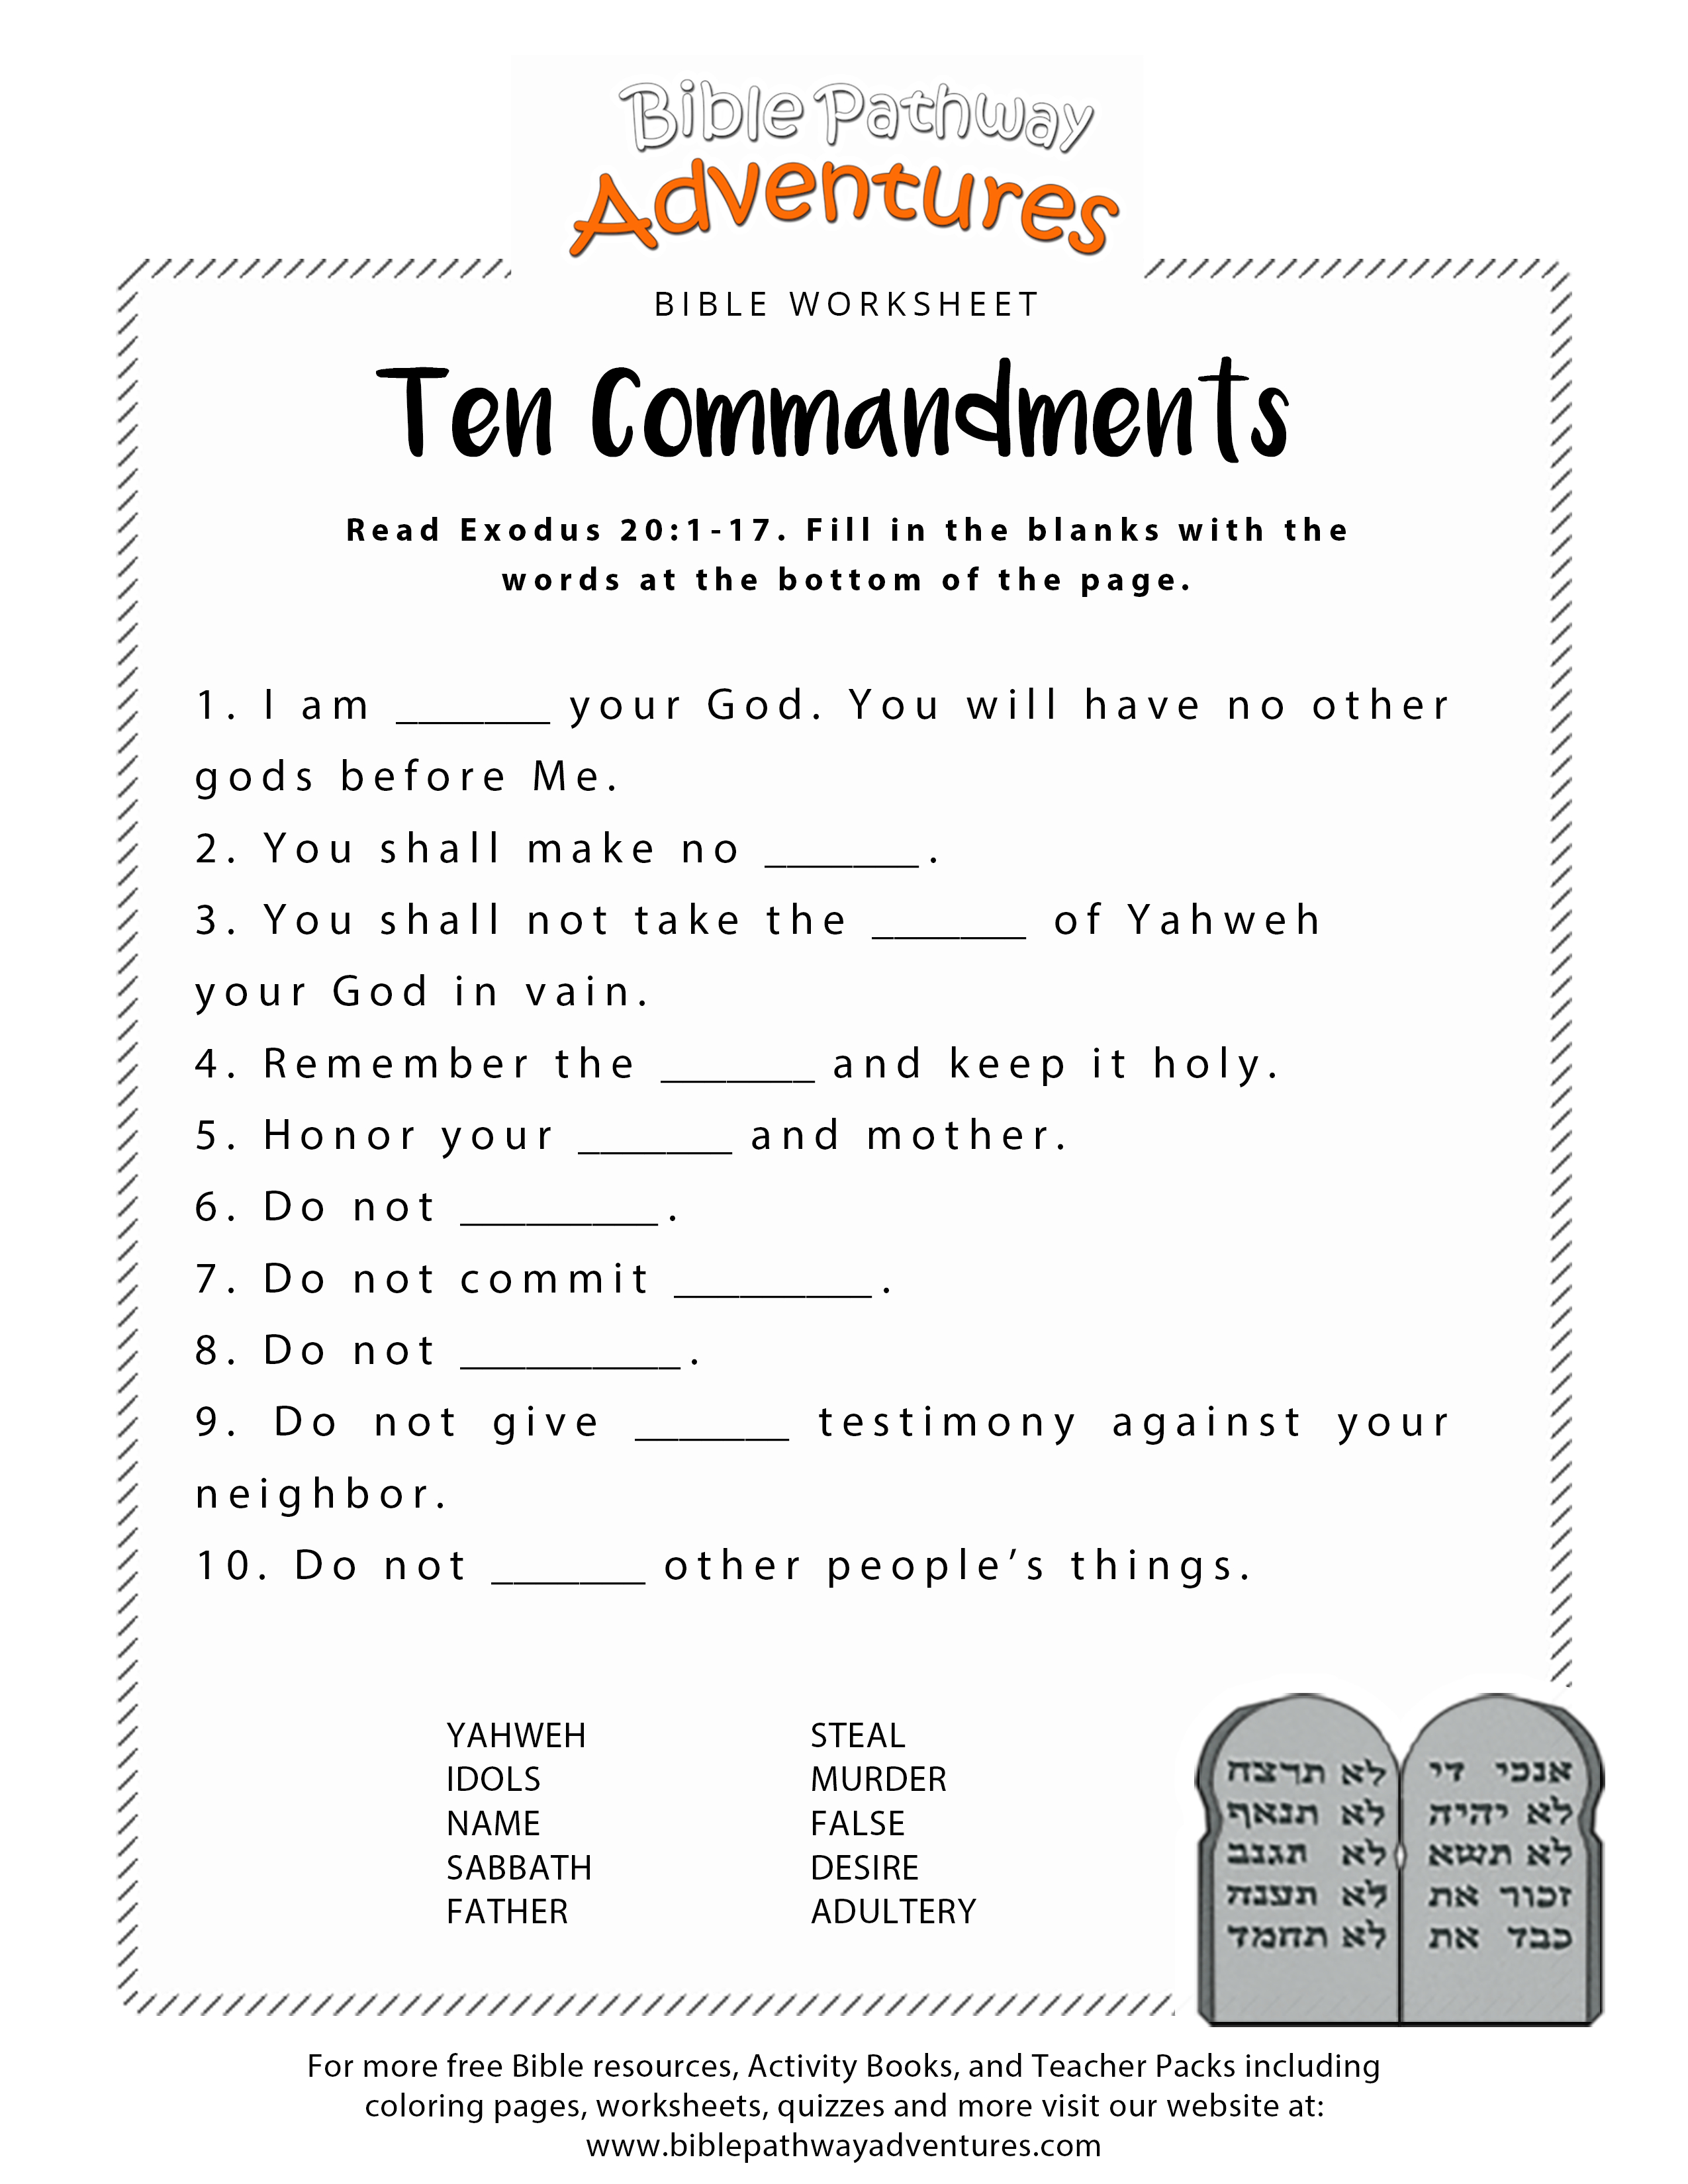 Ten Commandments Worksheet For Kids - Free Printable Bible Games For Youth